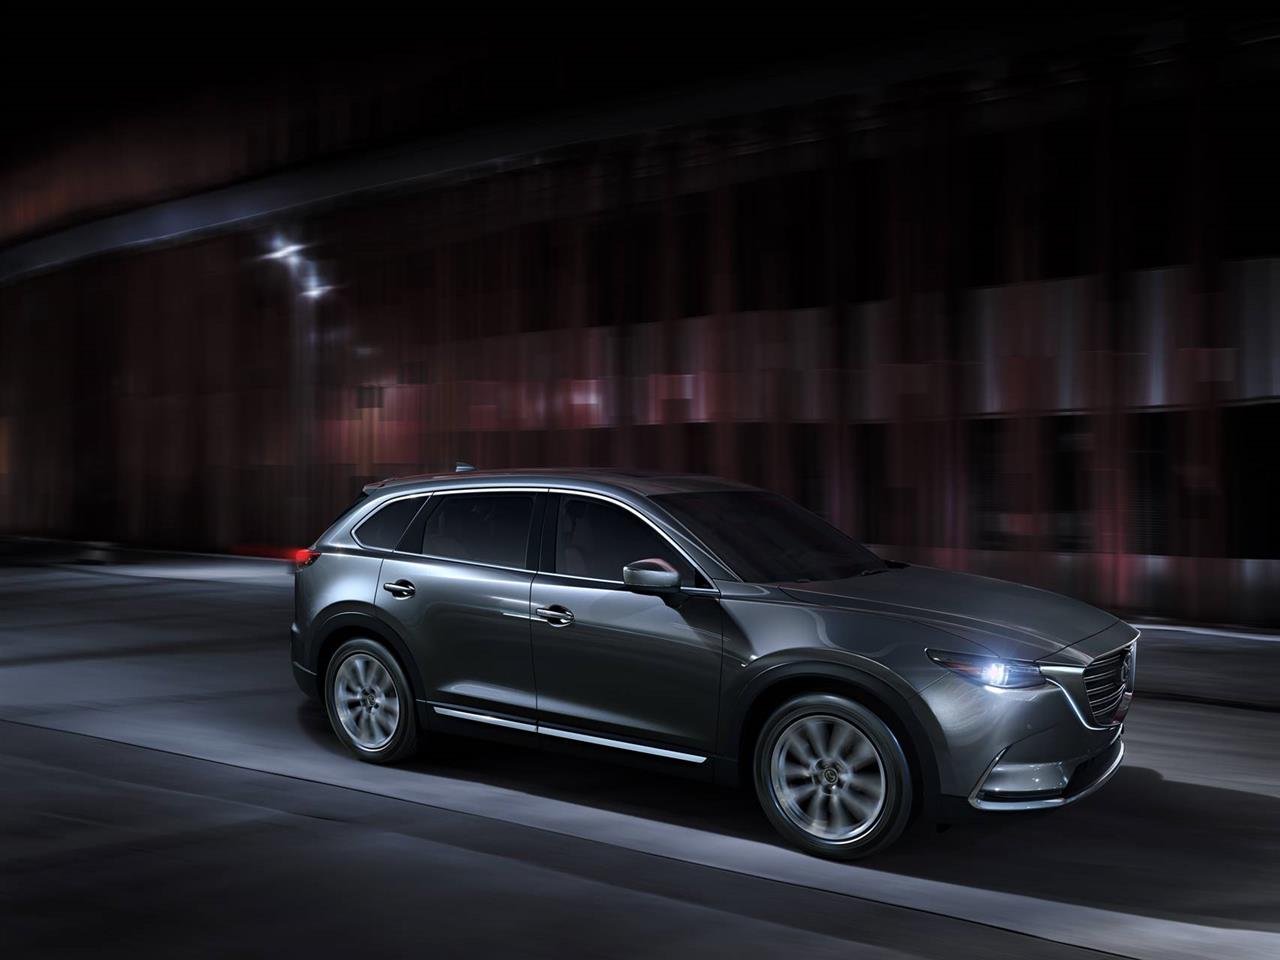 2022 Mazda CX-9 Features, Specs and Pricing